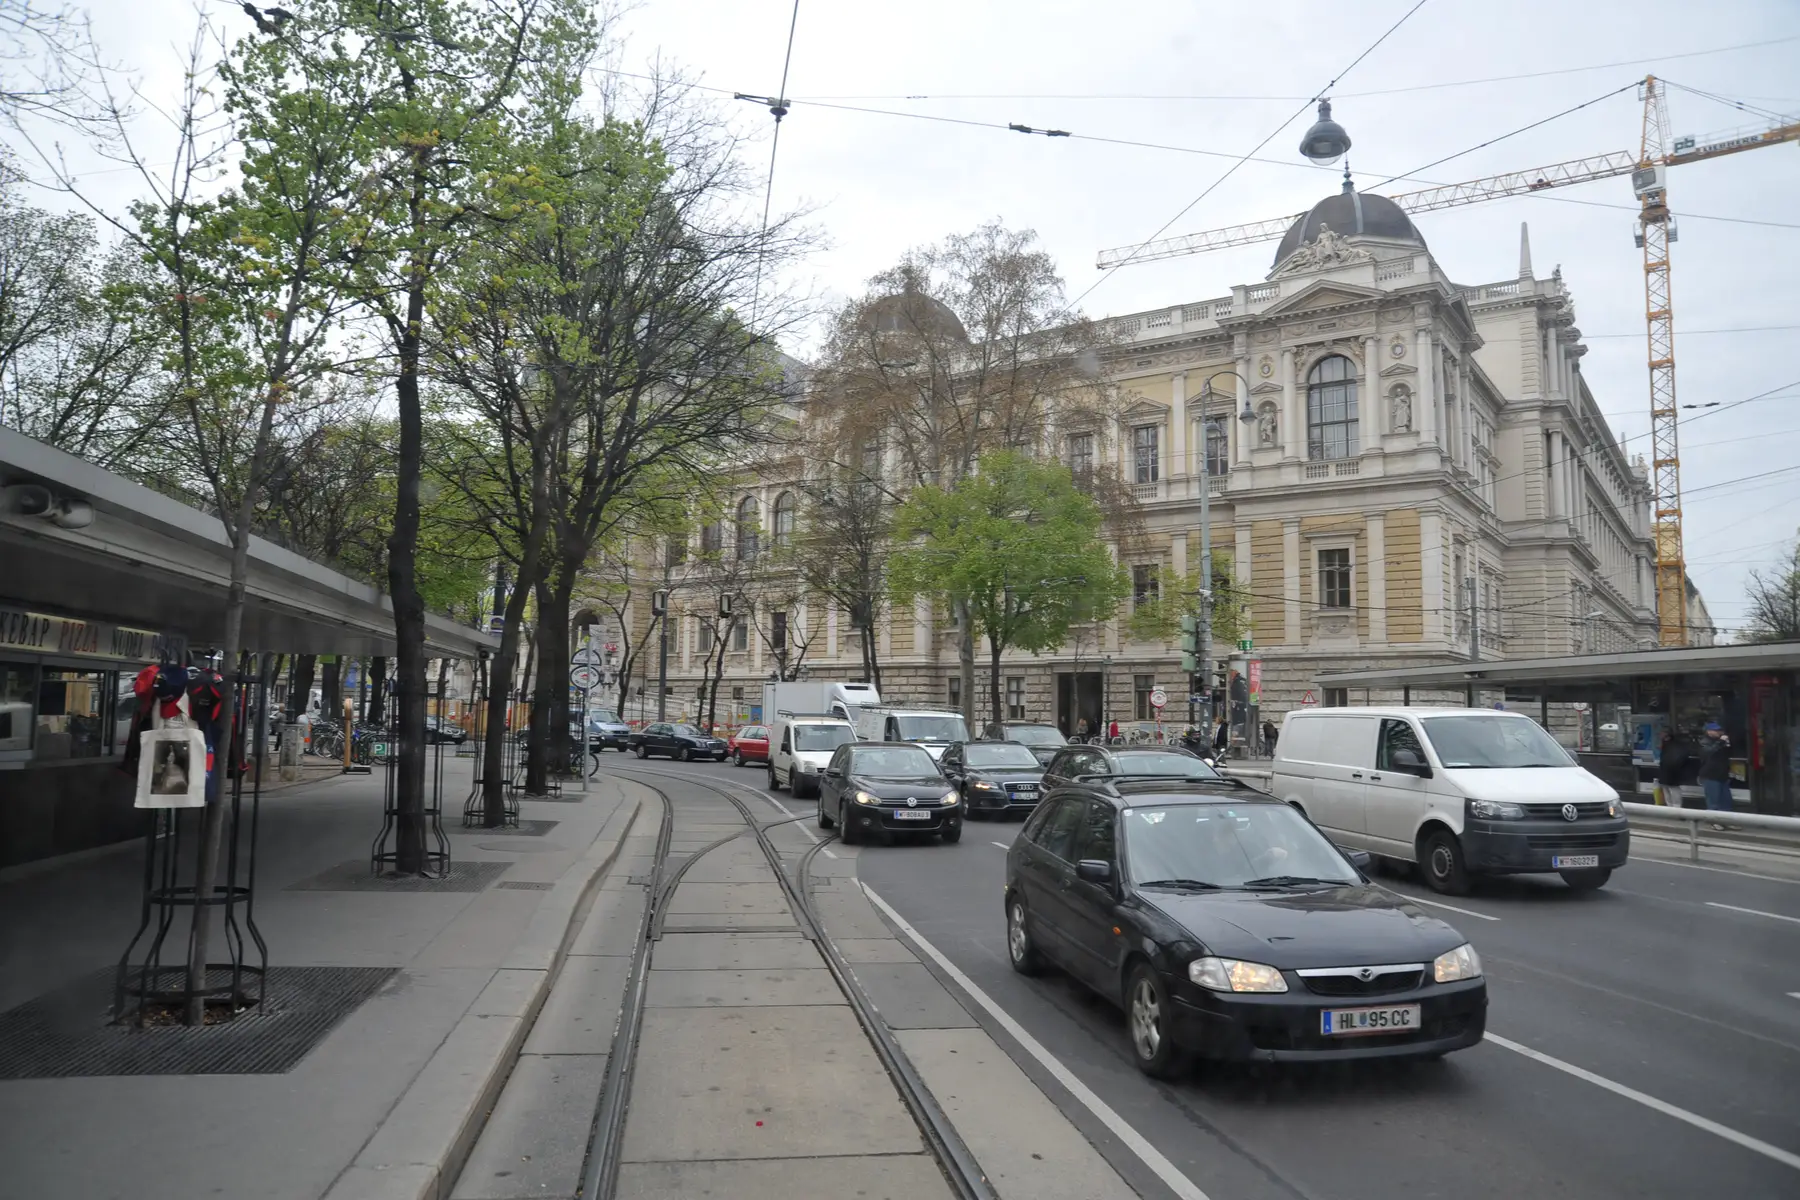 Cars on a street in Vienna